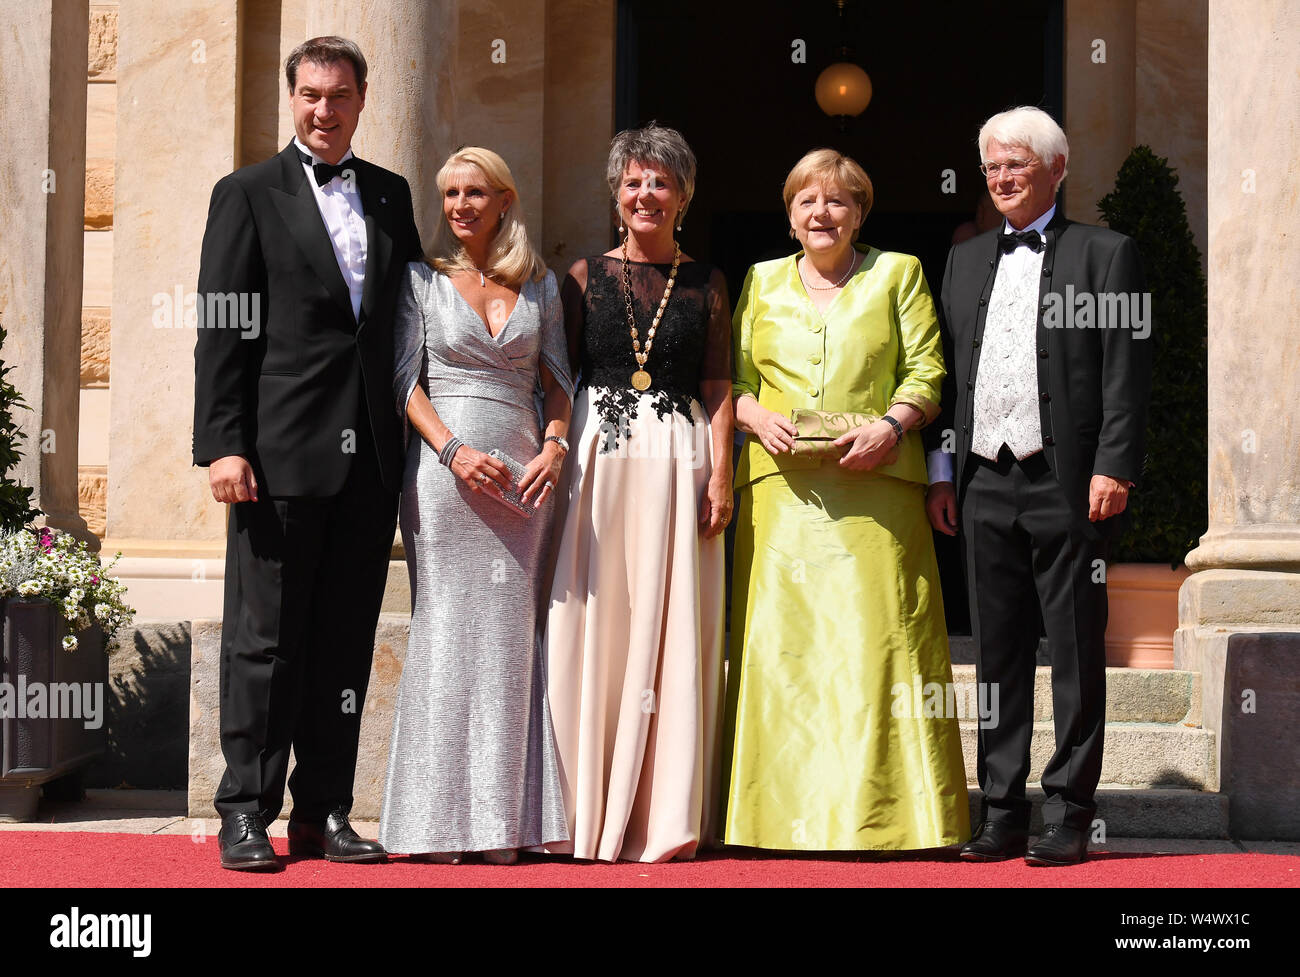 Bayreuth, Germany. 25th July, 2019. Federal Chancellor Angela Merkel (CDU, 2nd from right) together with the Bavarian Prime Minister Markus Söder (CSU, l) and his wife Karin Baumüller-Söder (2nd from left) is welcomed by the Mayor of Bayreuth Brigitte Merk-Erbe and her husband Thomas (r) at the beginning of the Bayreuth Festival 2019. The Richard Wagner Festival began in Bayreuth on Thursday. Credit: Tobias Hase/dpa/Alamy Live News Stock Photo